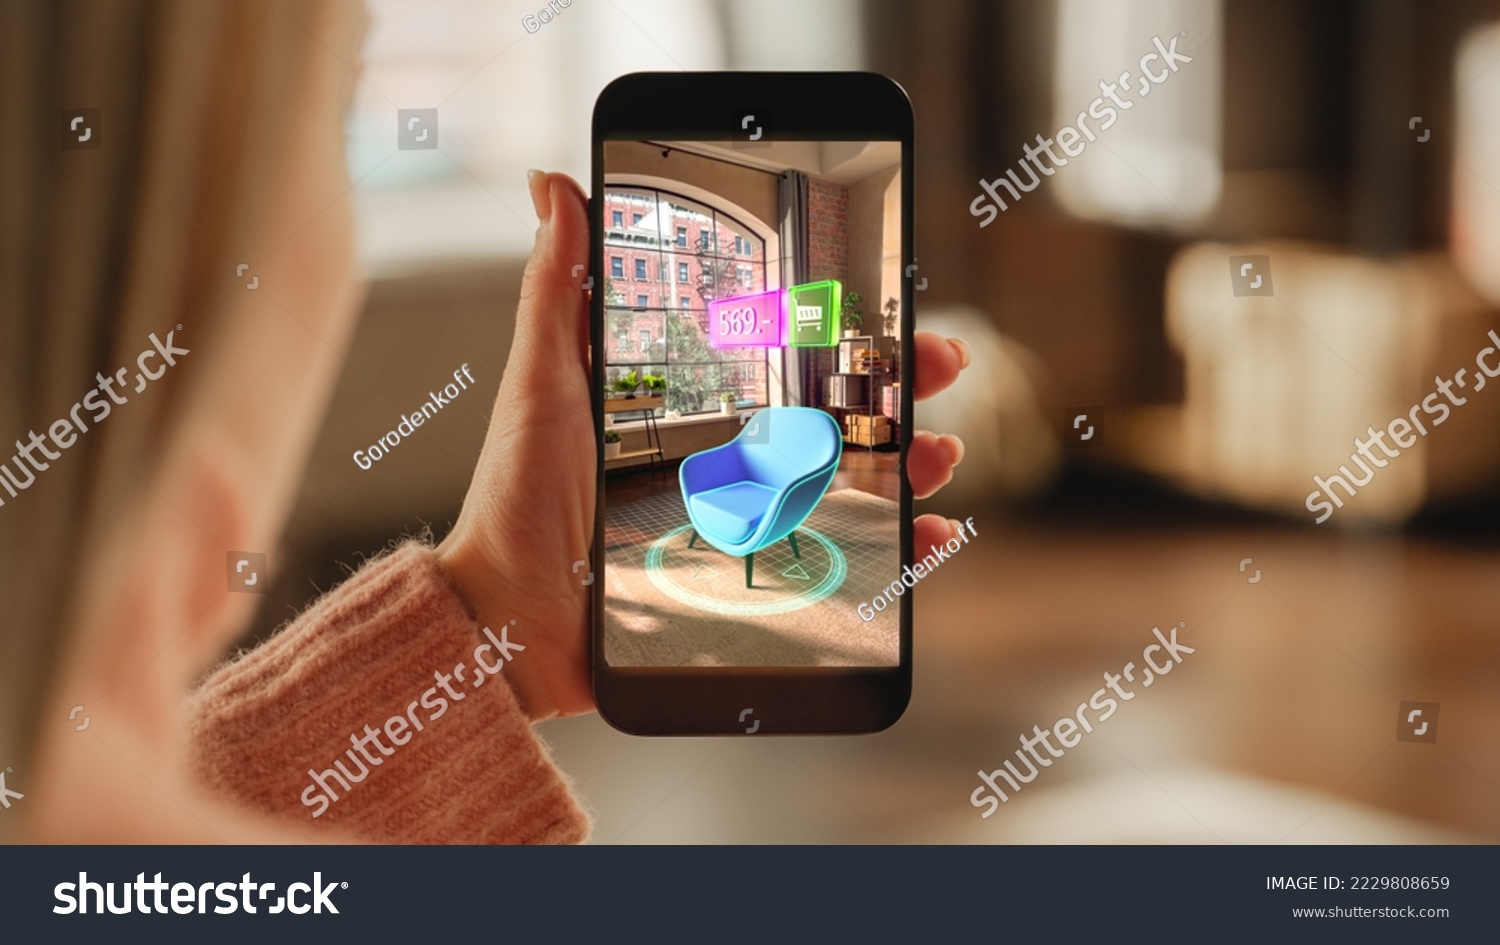 Over the Shoulder Footage of a Female Hand, Holding Smartphone with an Augmented Reality Display Showing a Chair. Woman Doing Online Shopping and Checking her Options In Live Situation In Distance #2229808659